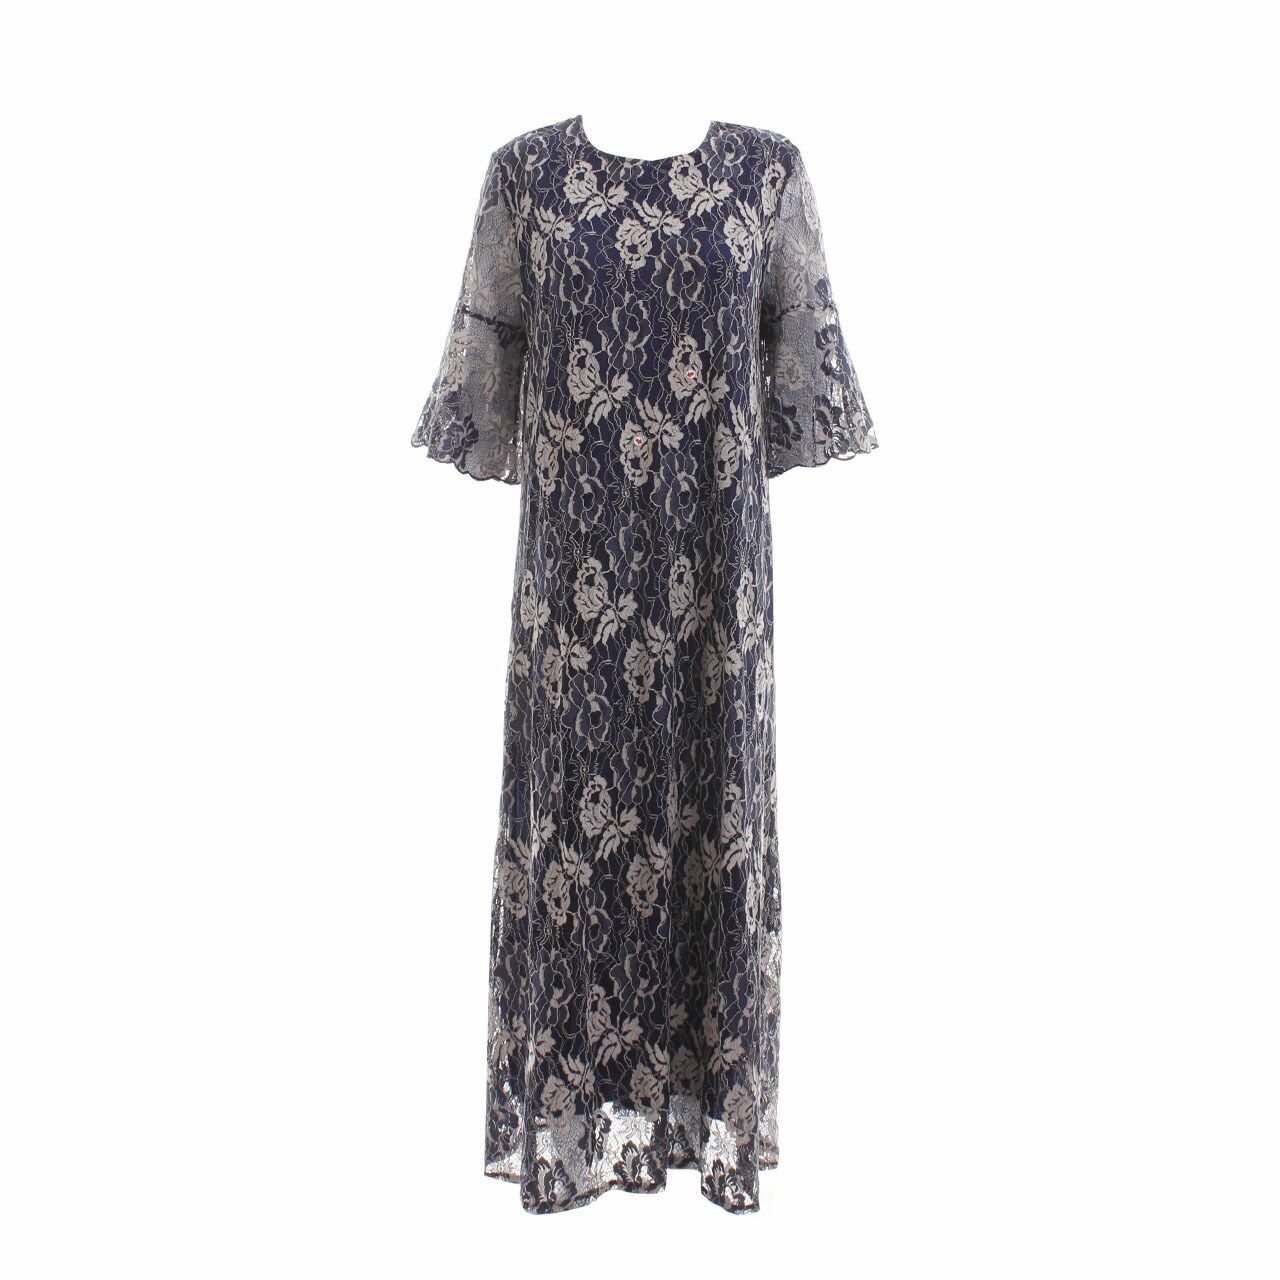 Chic Simple Navy Lace Long Dress